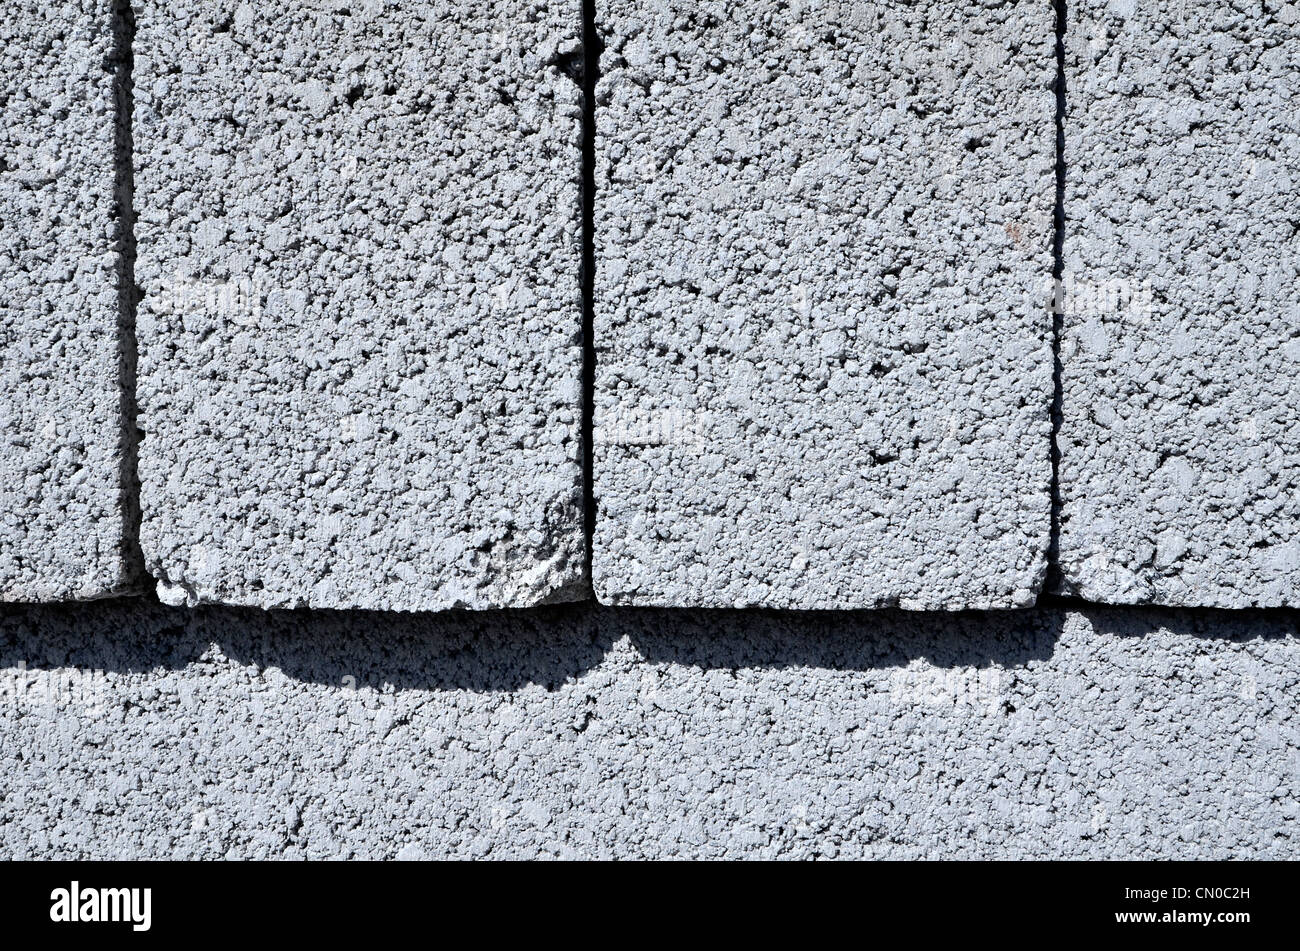 Closer detail of stacked concrete building blocks on construction site. Metaphor construction industry, construction supplies, building materials. Stock Photo